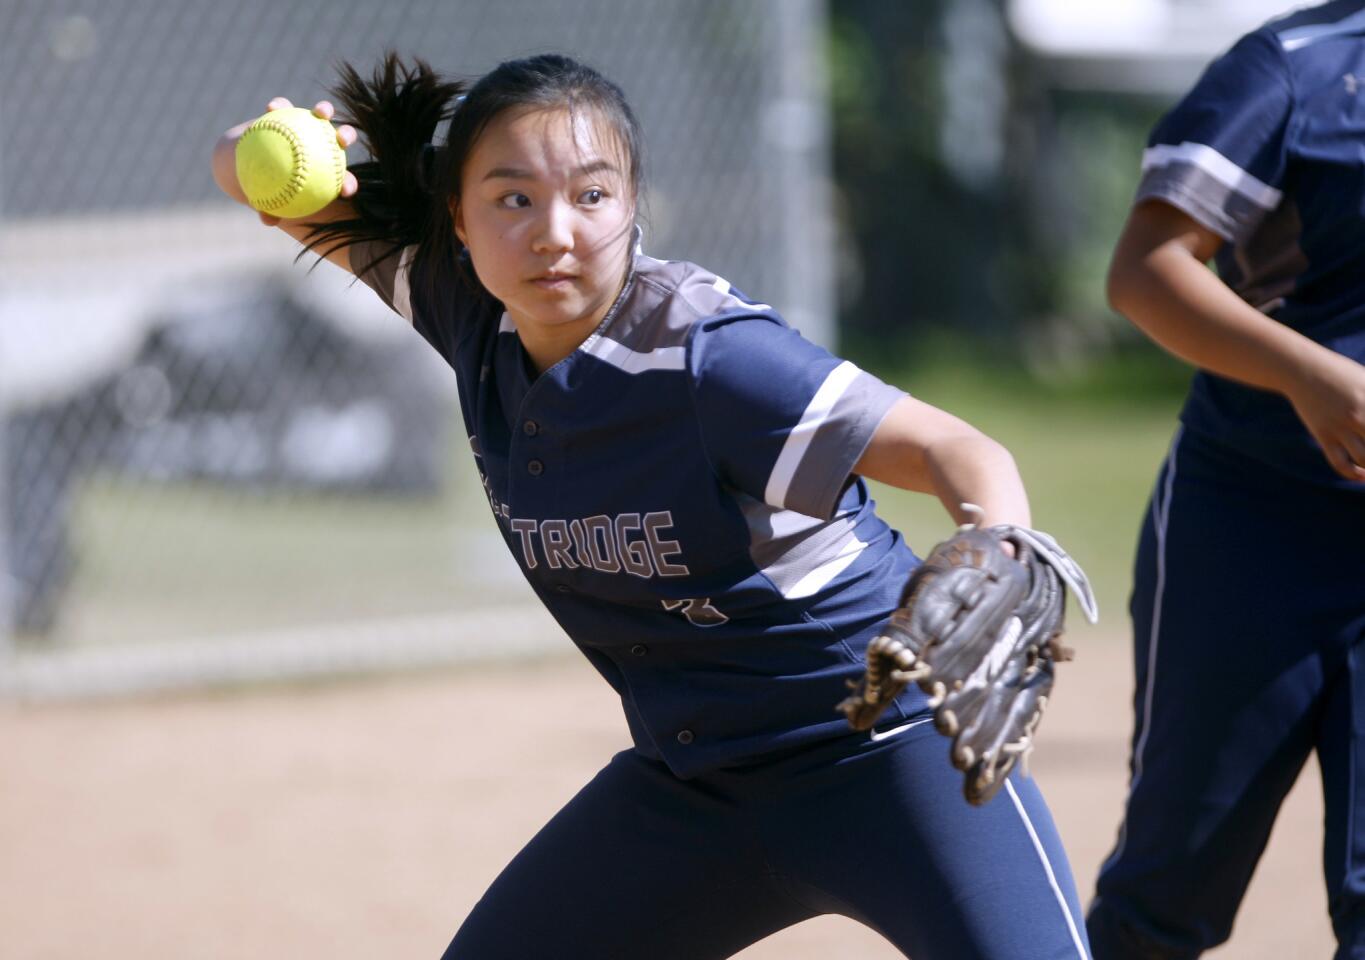 Flintridge Prep's softball pitcher #3 Therese Oshiro throws the runner out at first base in away game vs. Pasadena Poly in Pasadena on Wednesday, April 12, 2017.